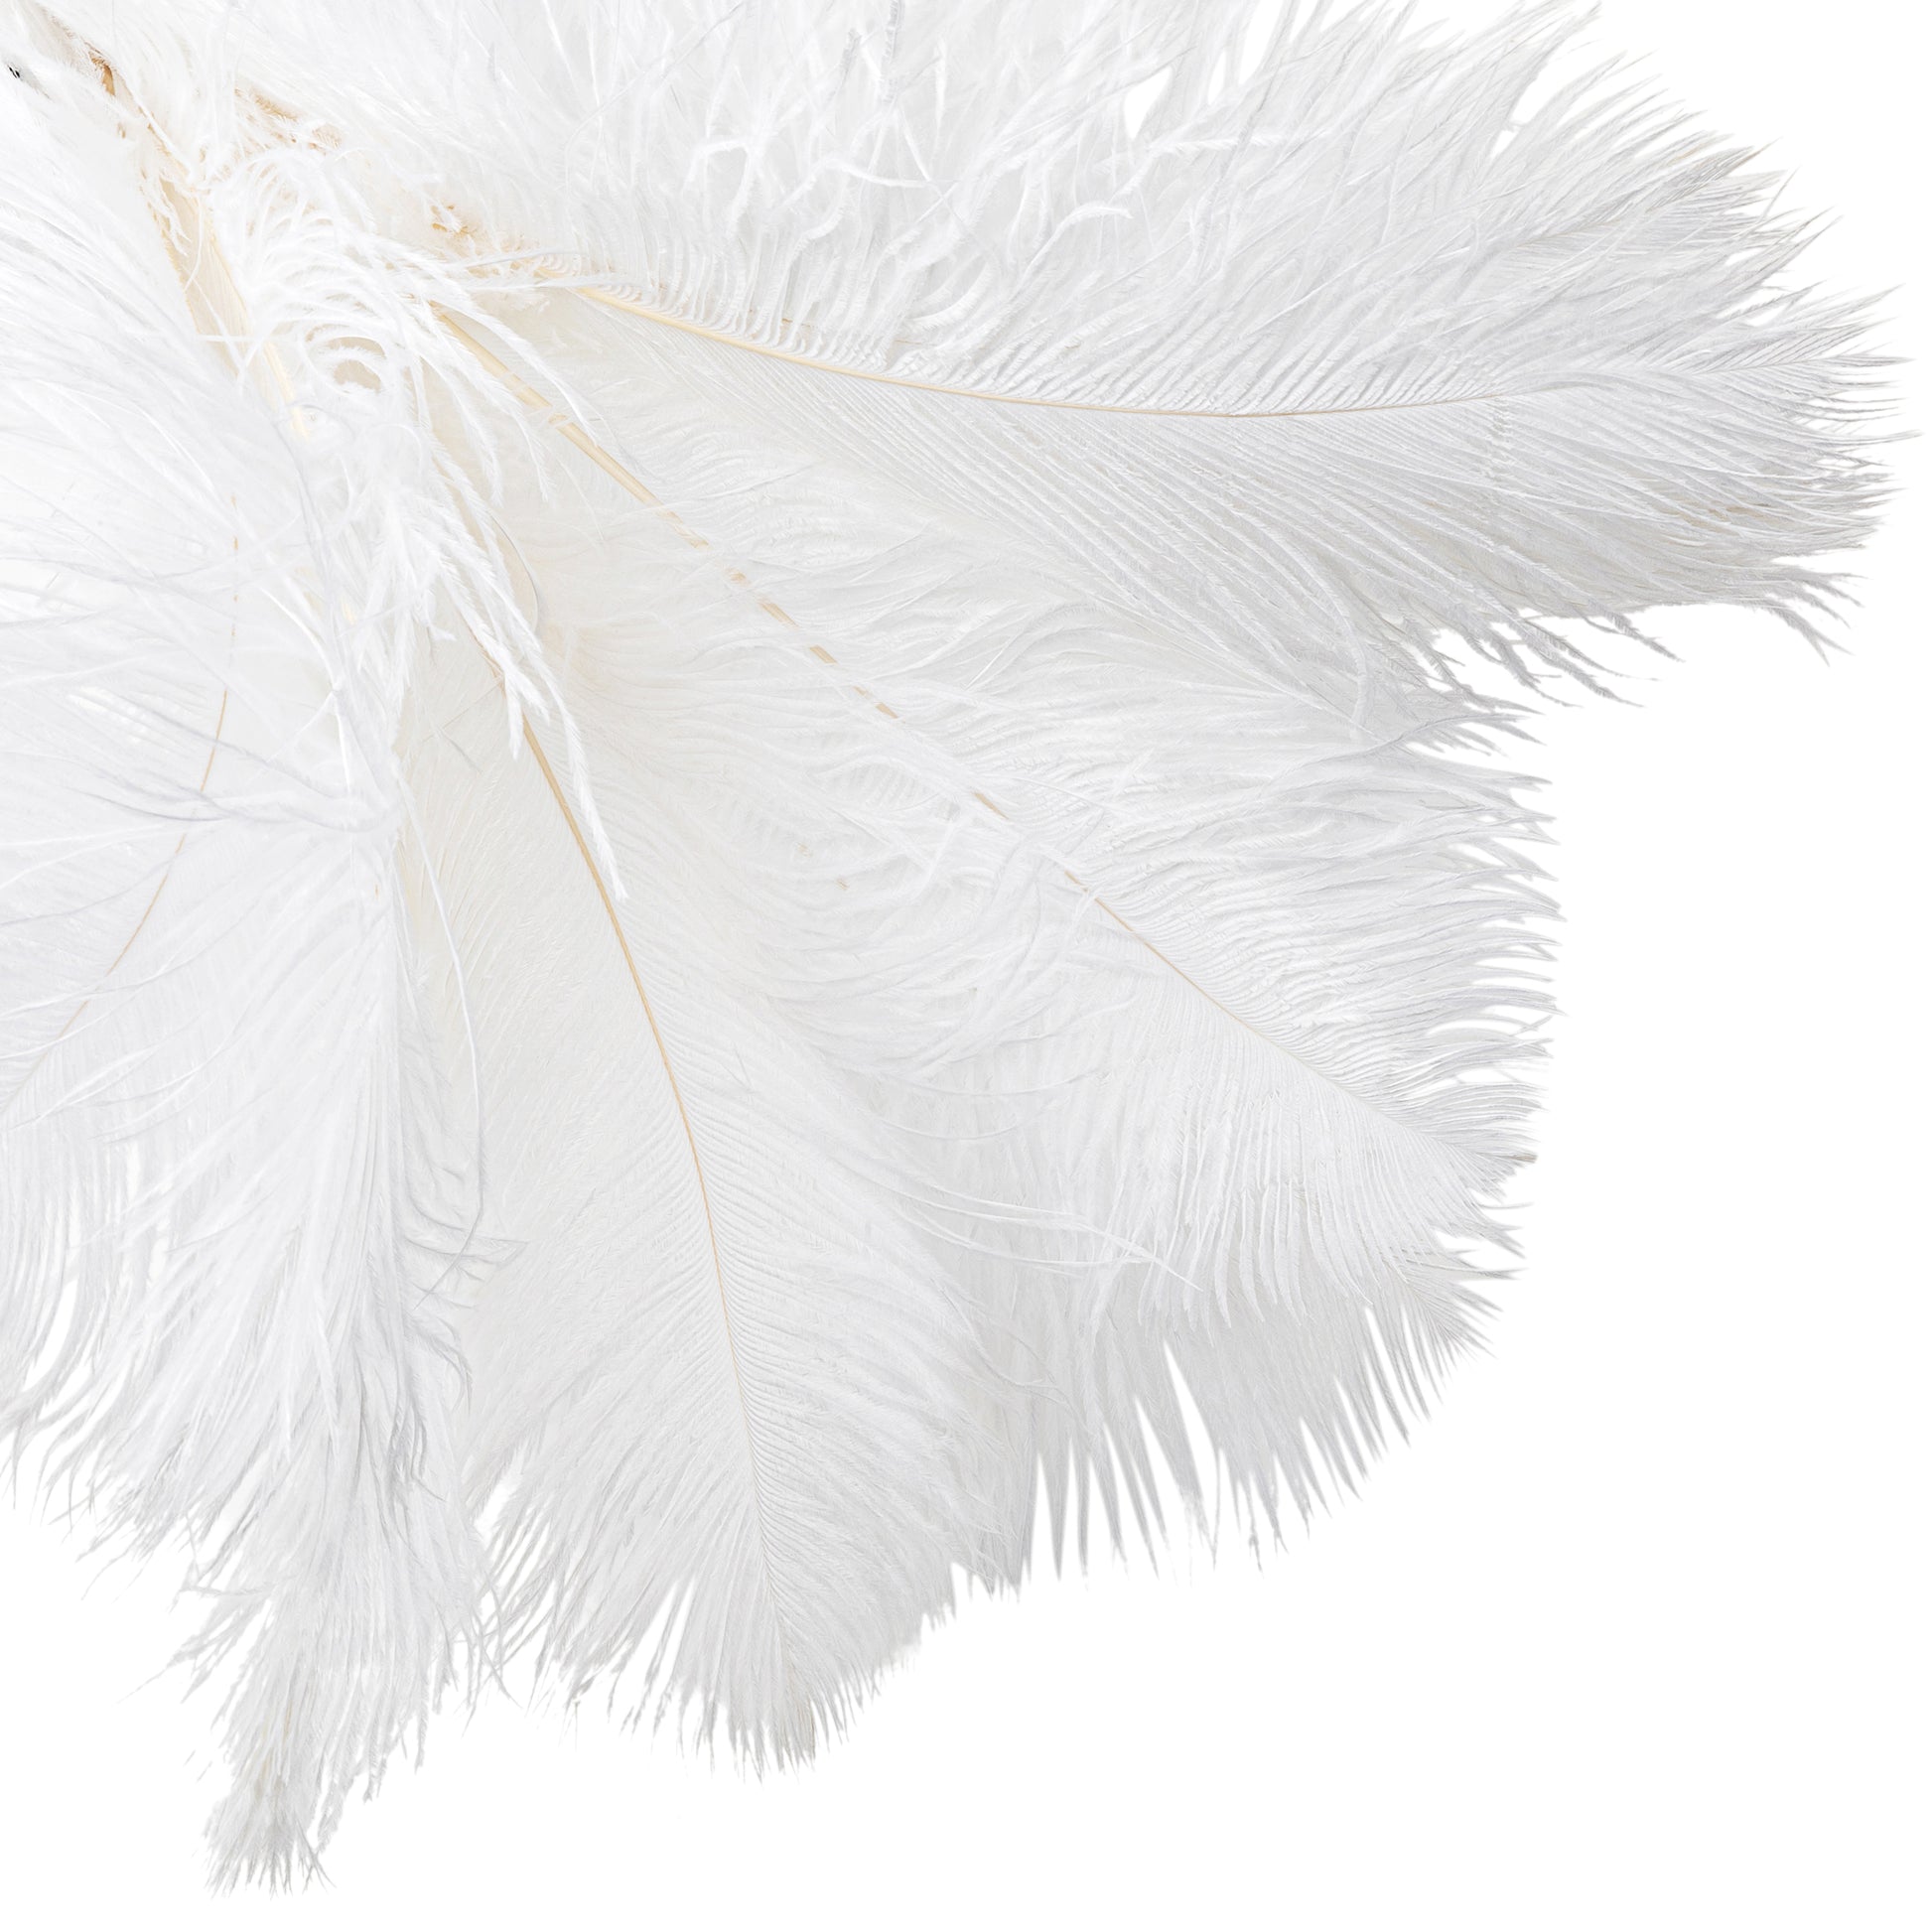 Single White or Black Ostrich Feathers $2.60 per stem (plume